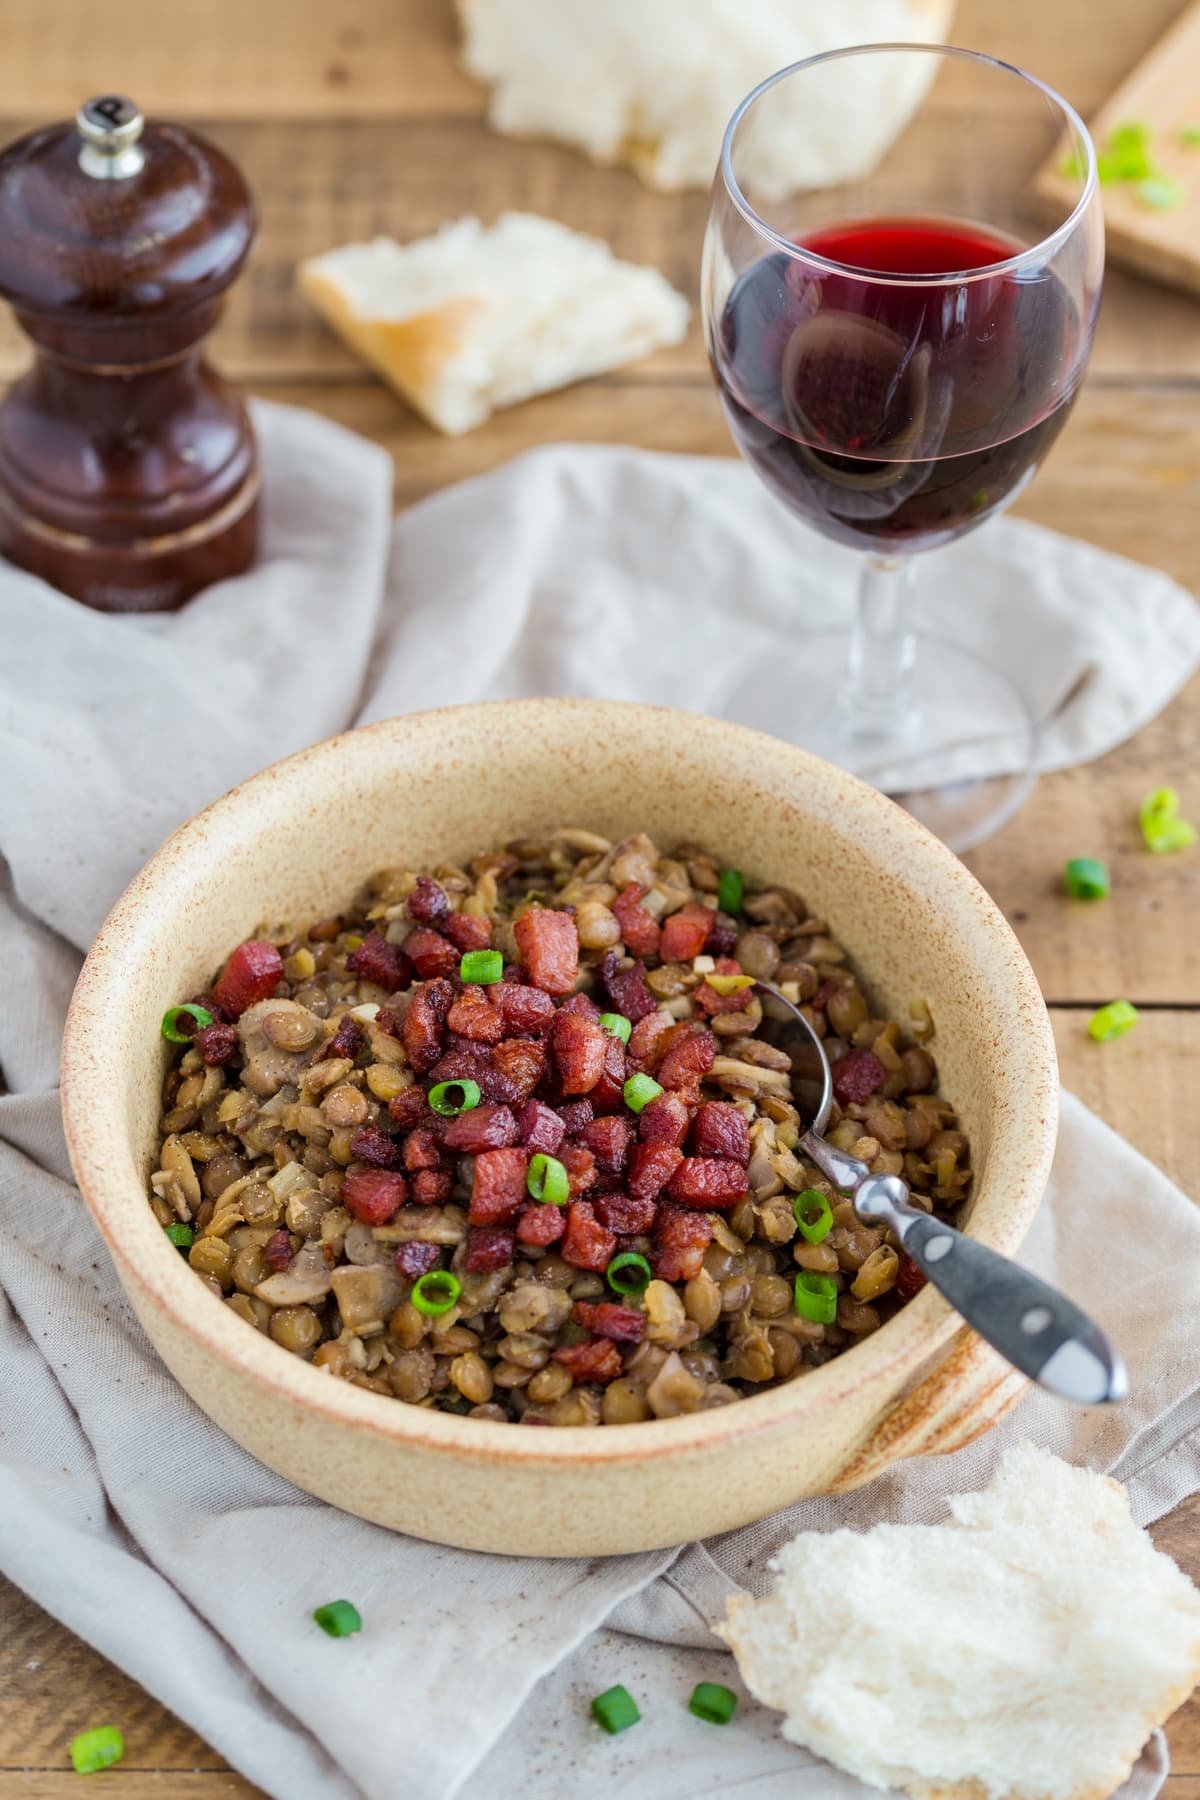 Lentil stew with crispy bacon and mushrooms.